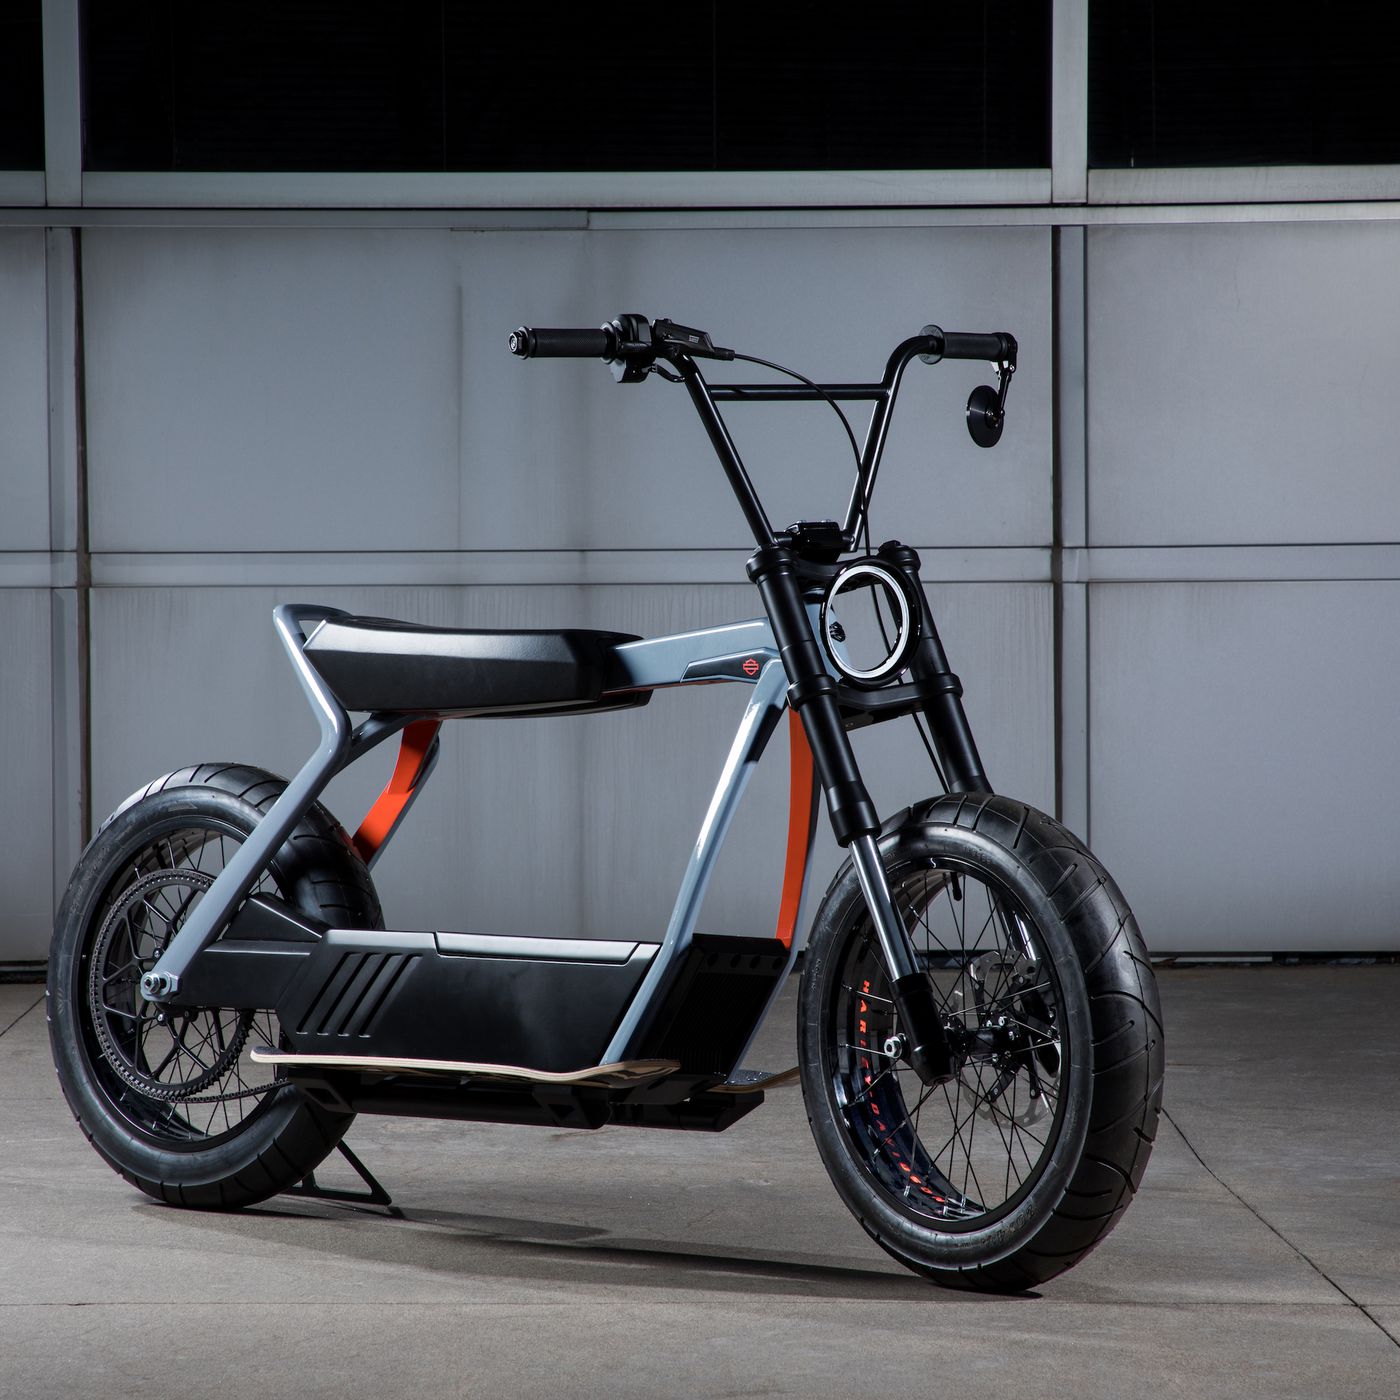 Harley Davidson S Electric Scooter Concept Is More Exciting Than Its Electric Motorcycle The Verge